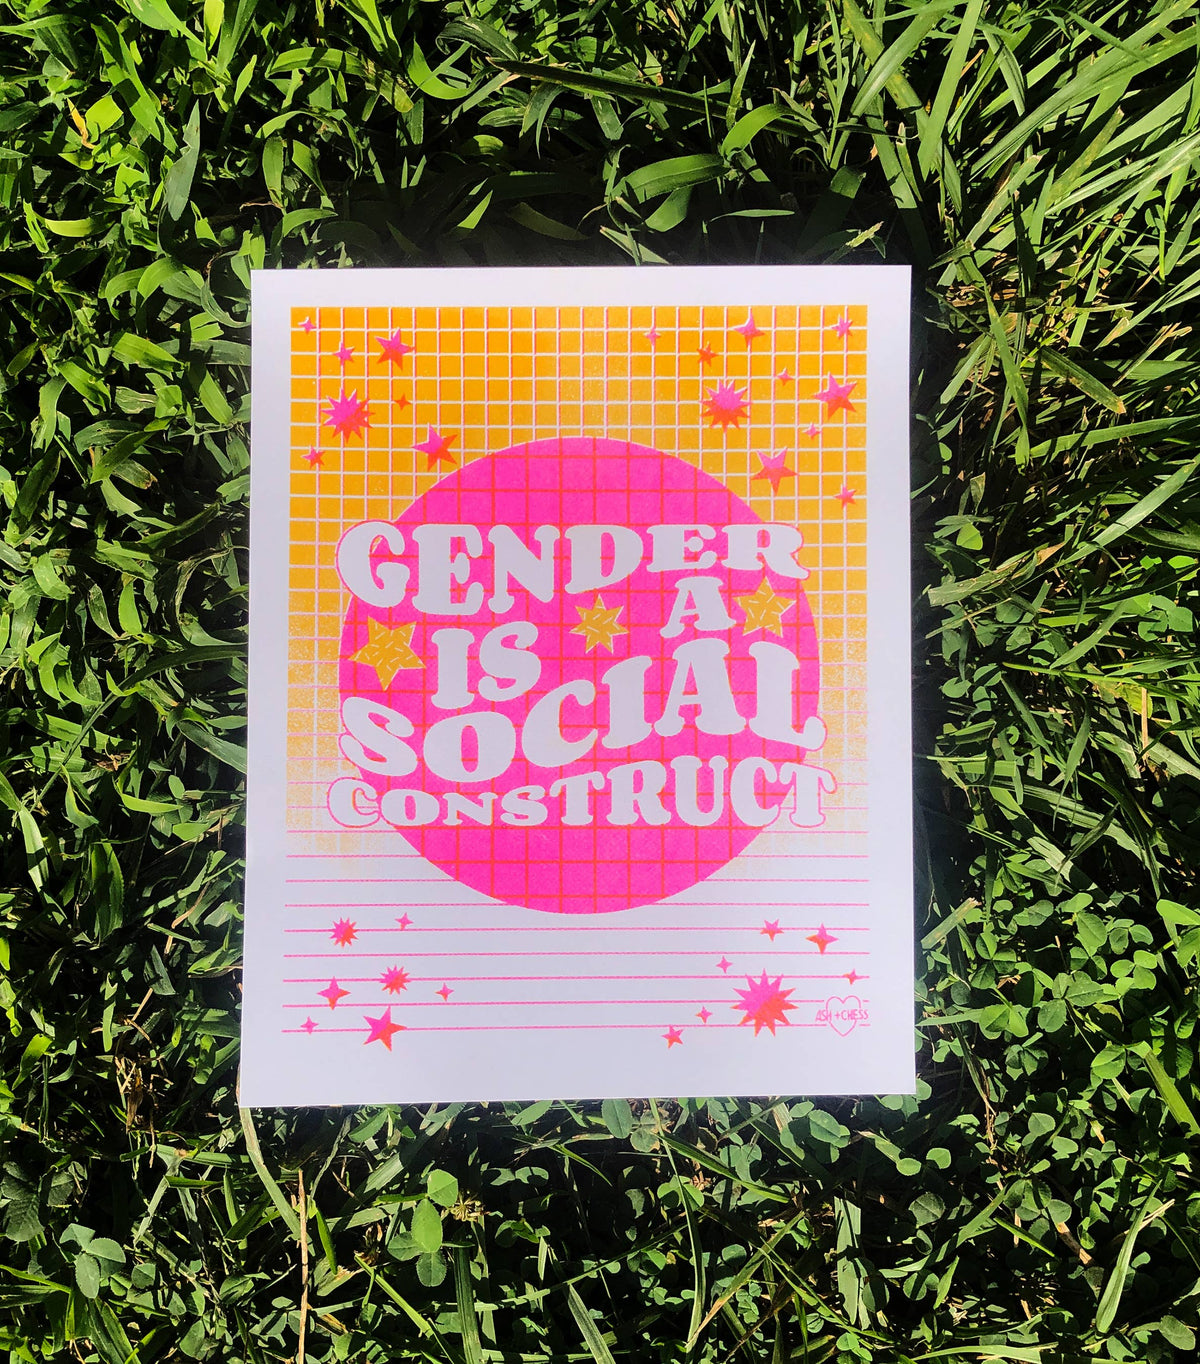 8"x10" Gender Is A Social Construct Risograph Print by Ash + Chess